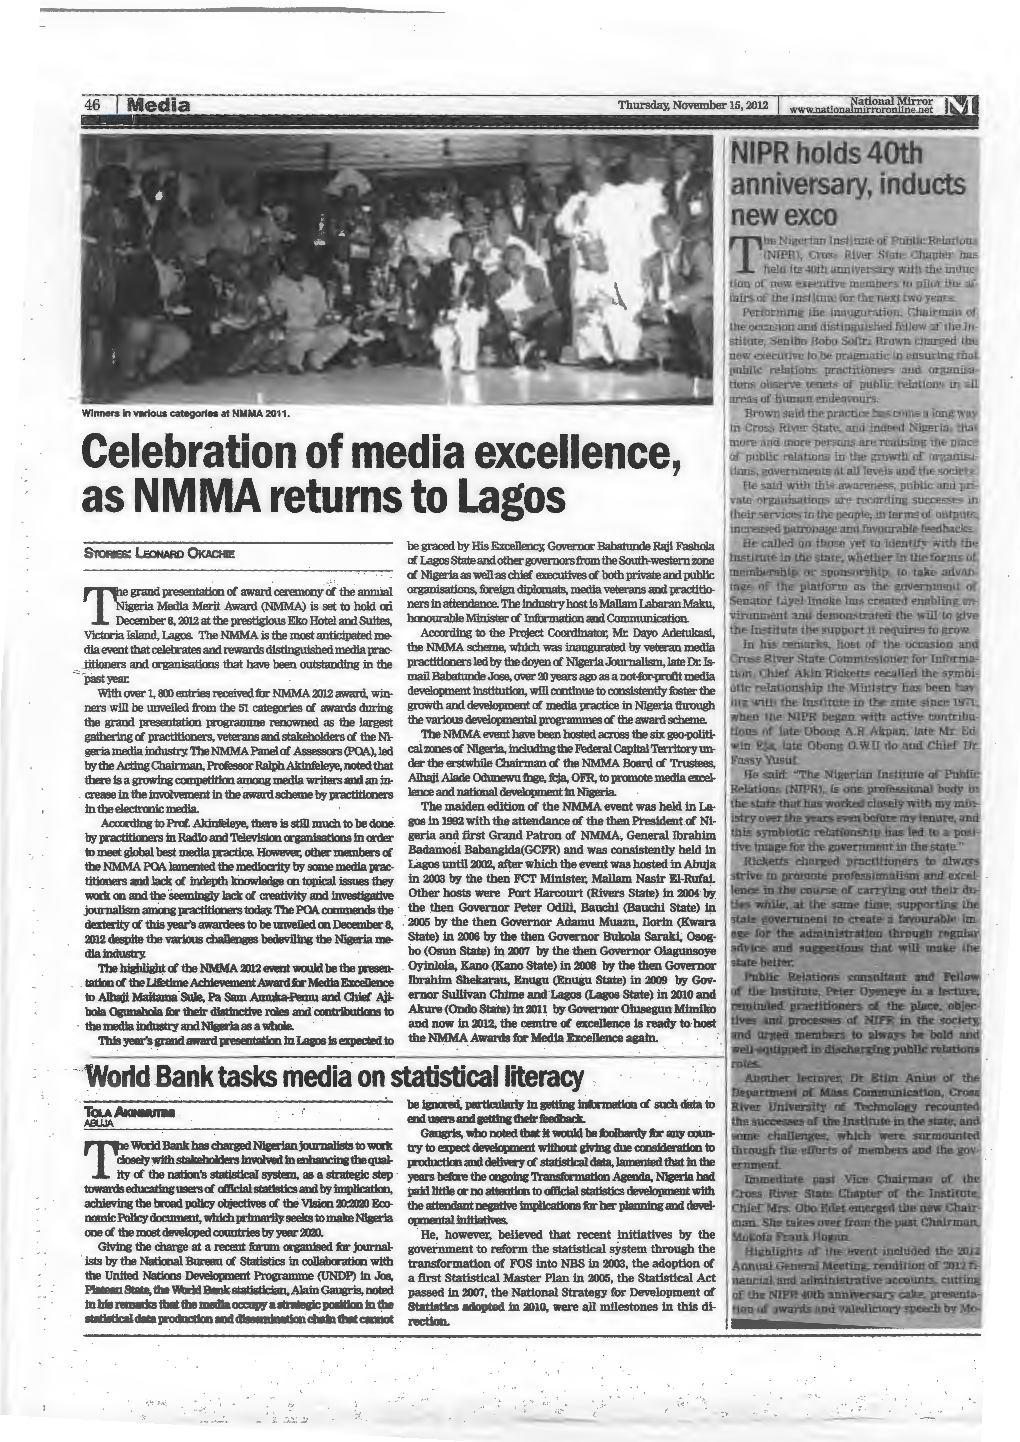 Celebration of Media Excellence, As NMMA Returns to Lagos